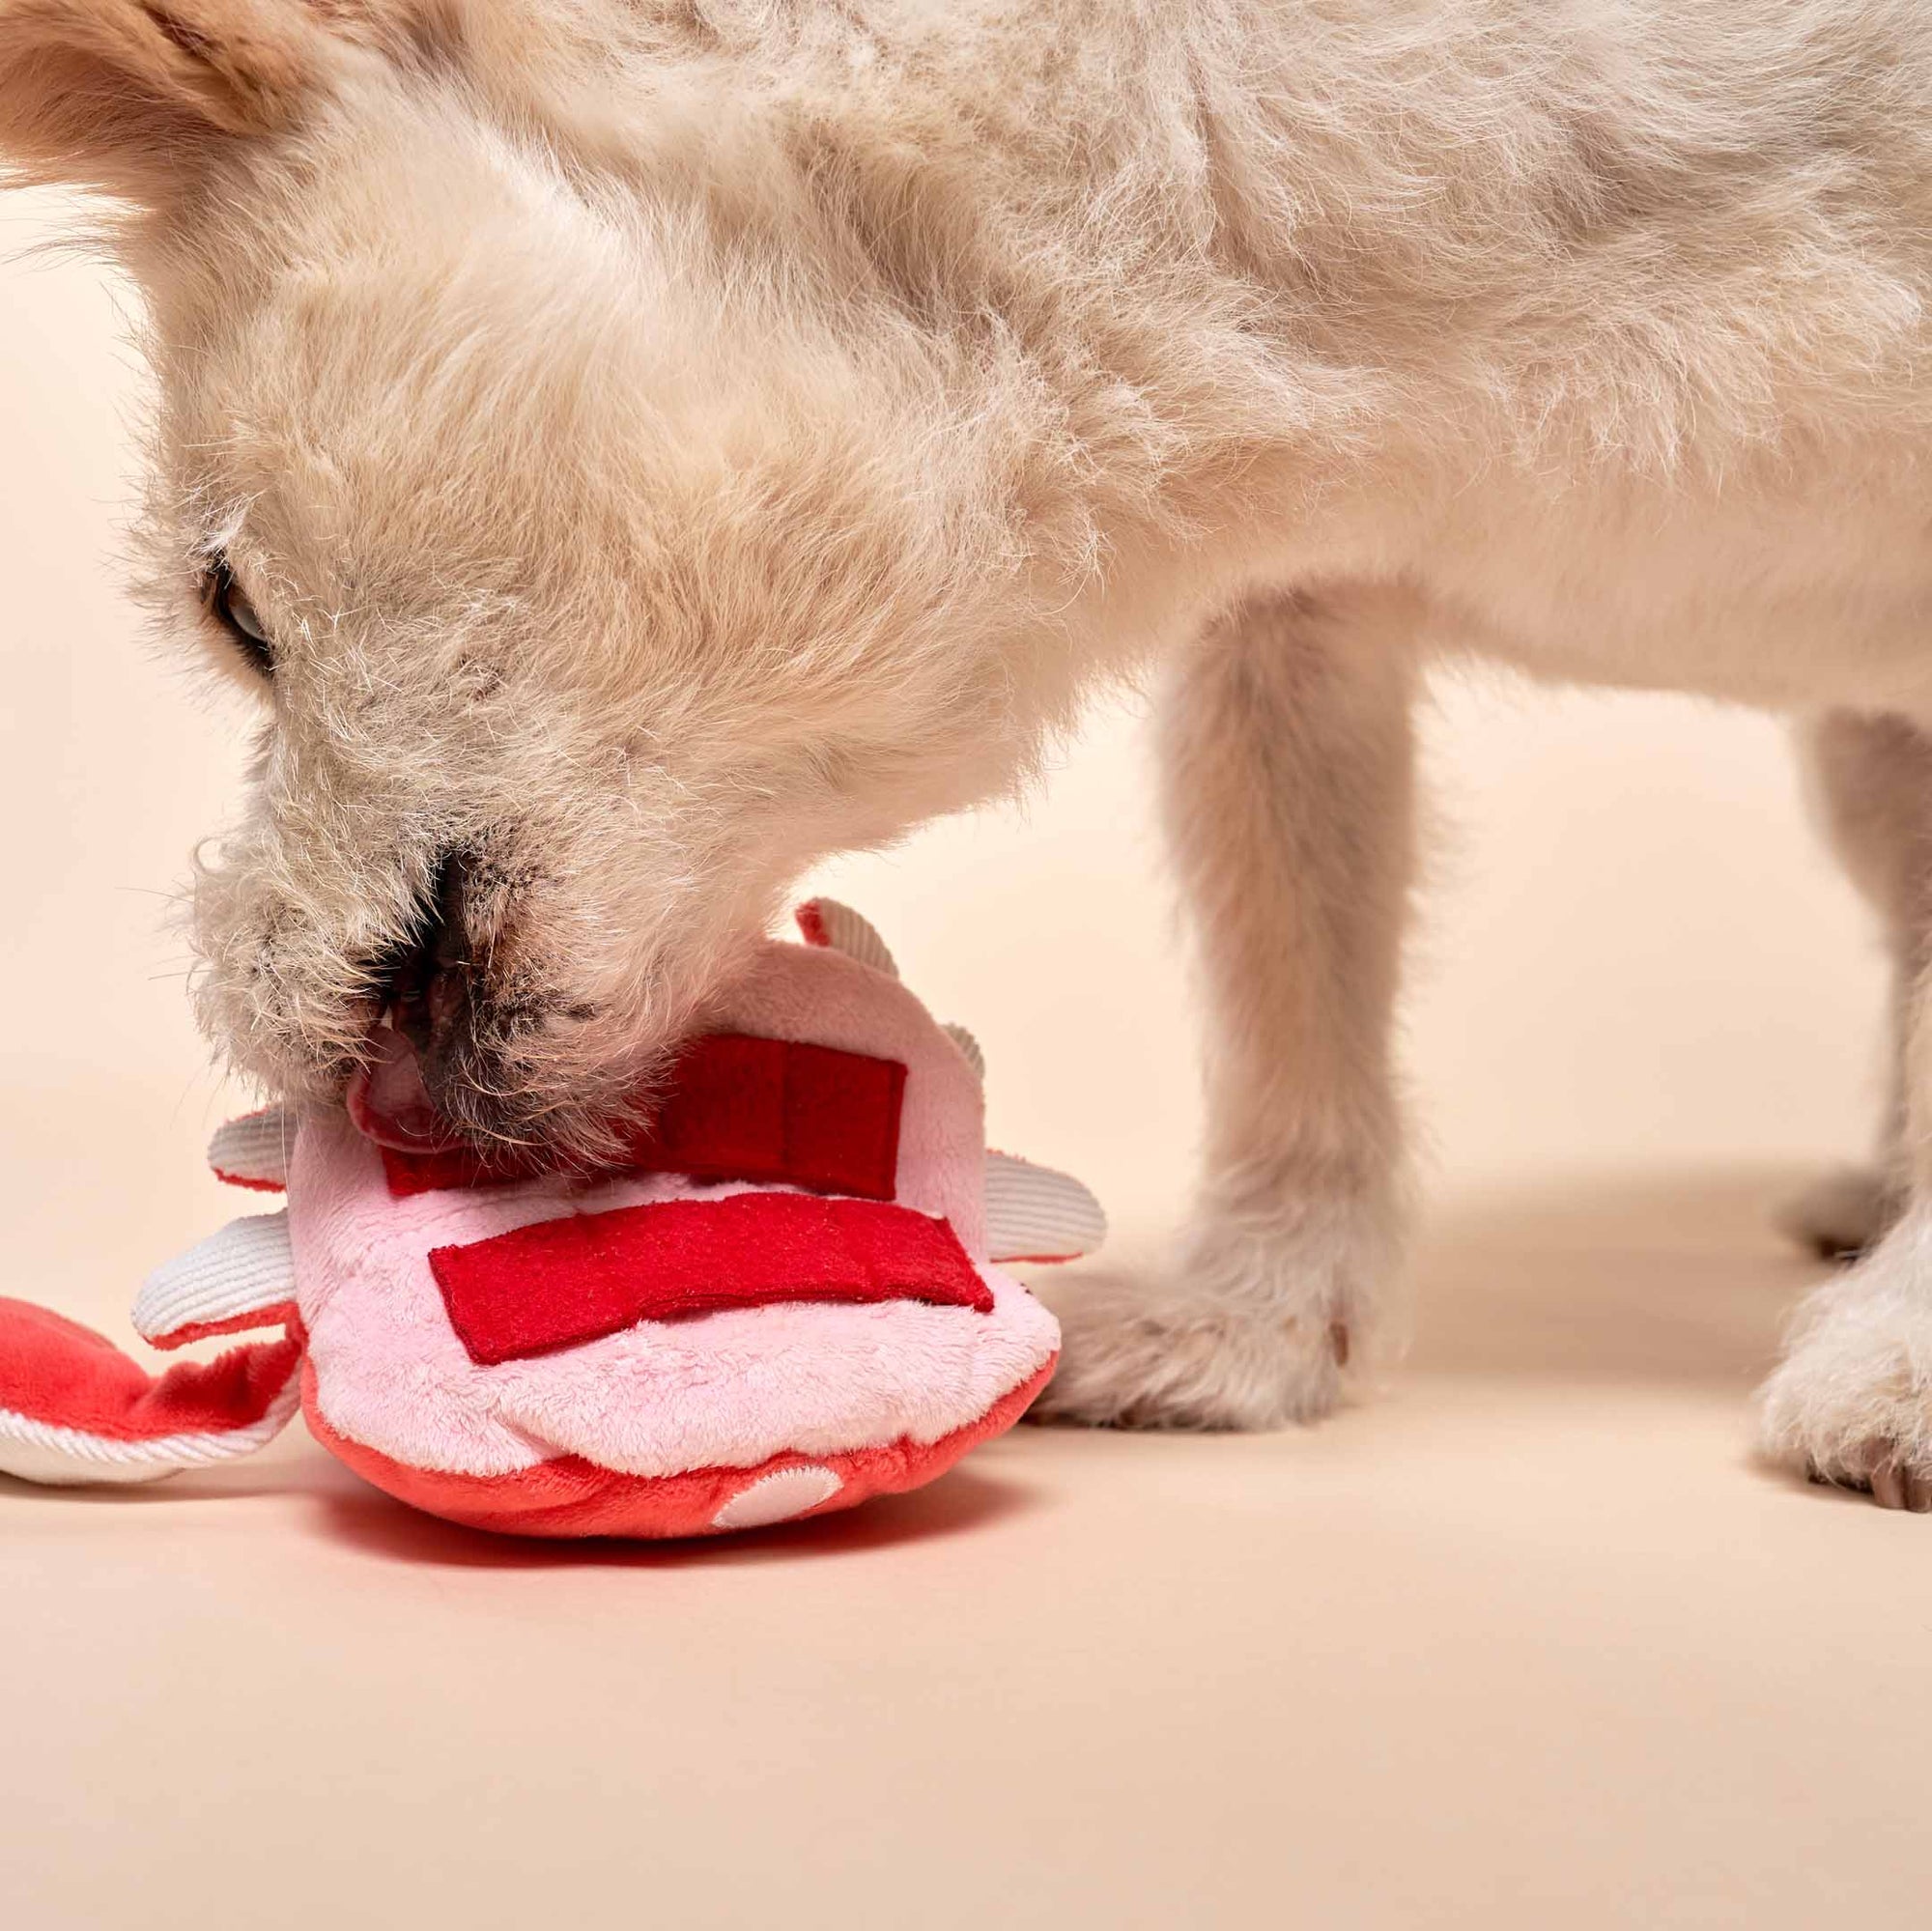 The image captures a small, light-colored dog with its nose buried in a red plush crab toy, likely trying to extract treats from within. This showcases the toy's interactive design for engaging pets in play and mental stimulation.